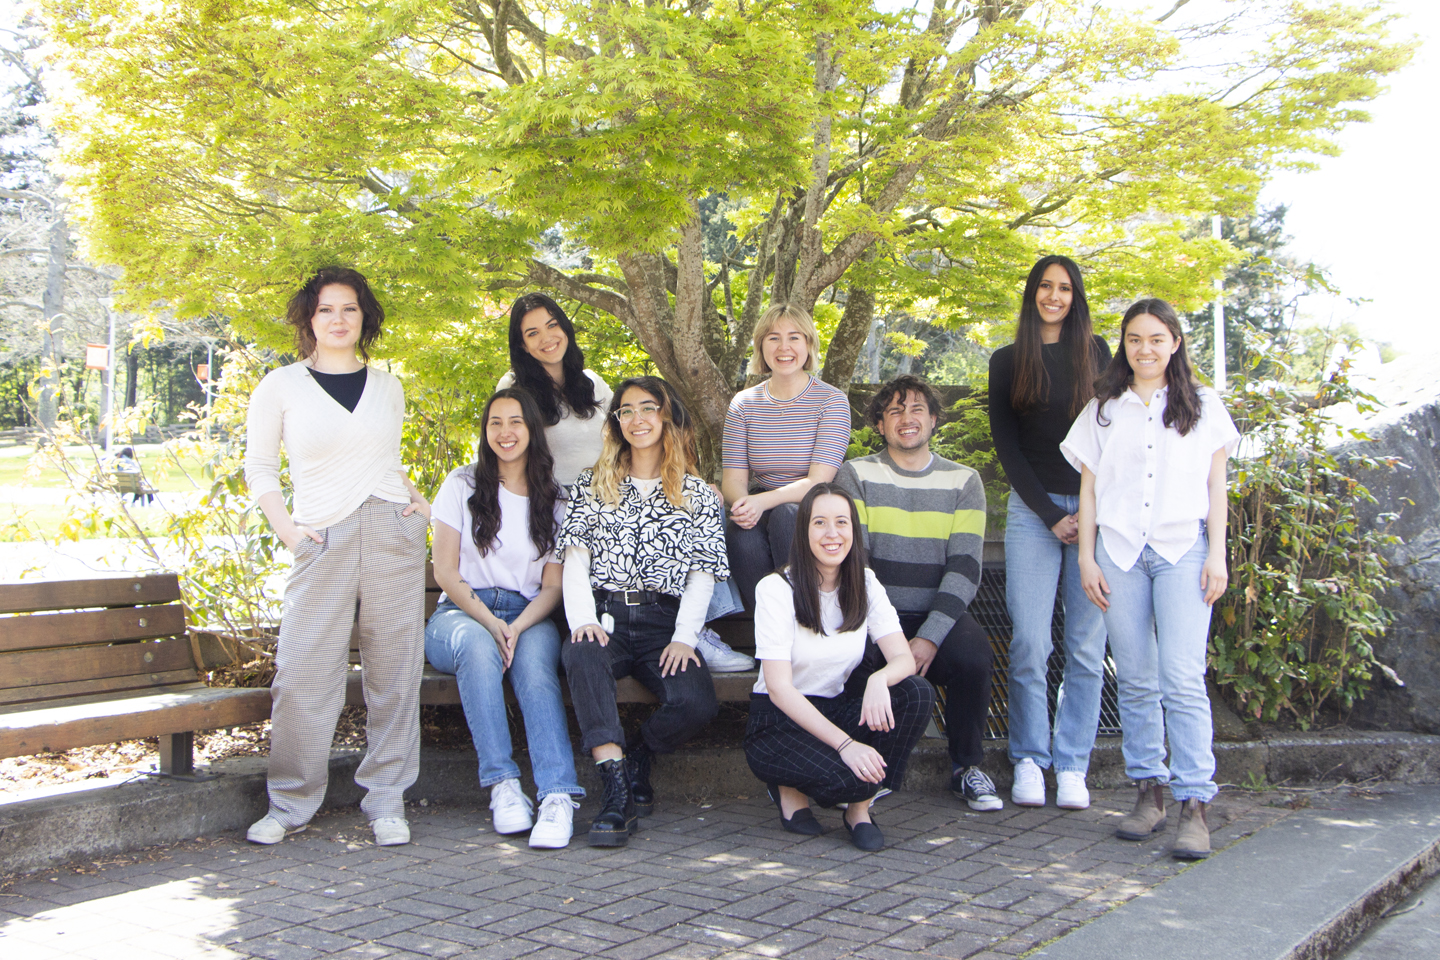 group photo of the 2022 CAPI interns during their pre-departure orientation at UVic Campus, April 2022